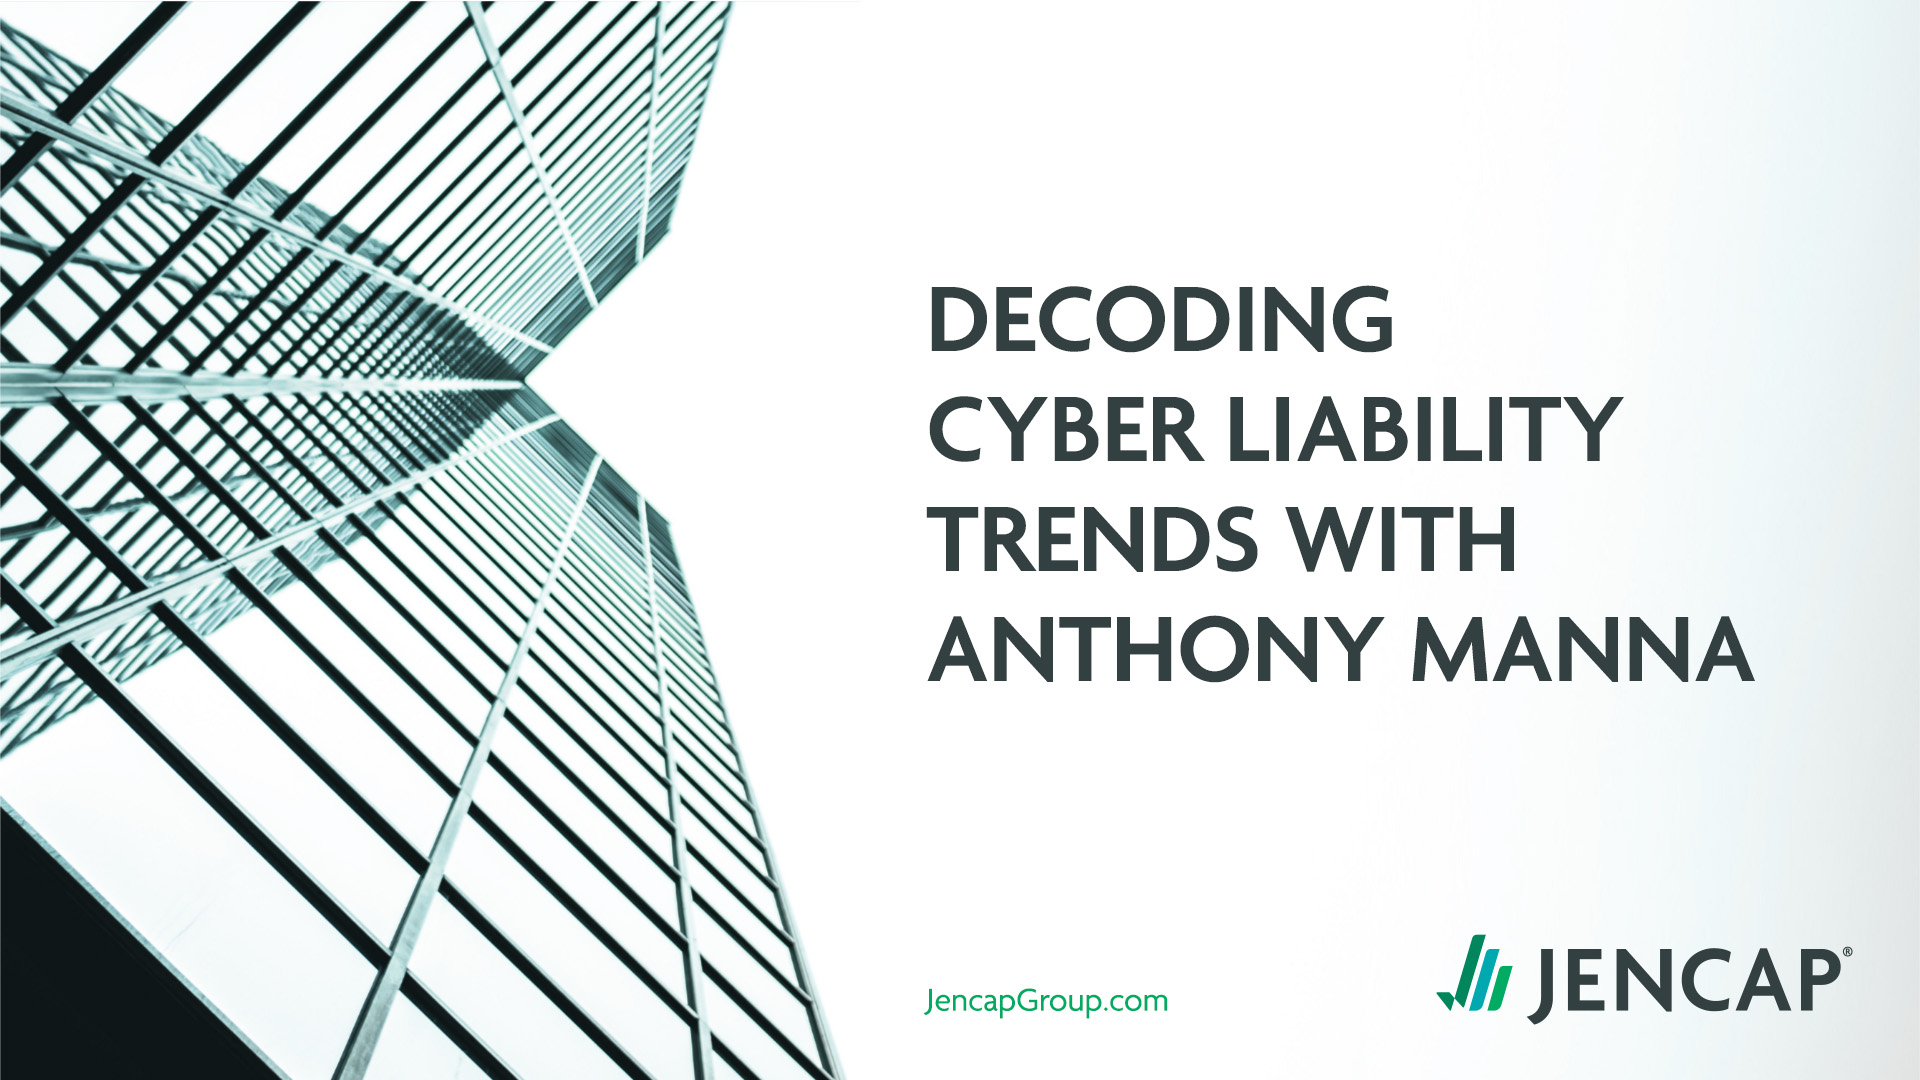 Decoding Cyber Liability Trends with Anthony Manna